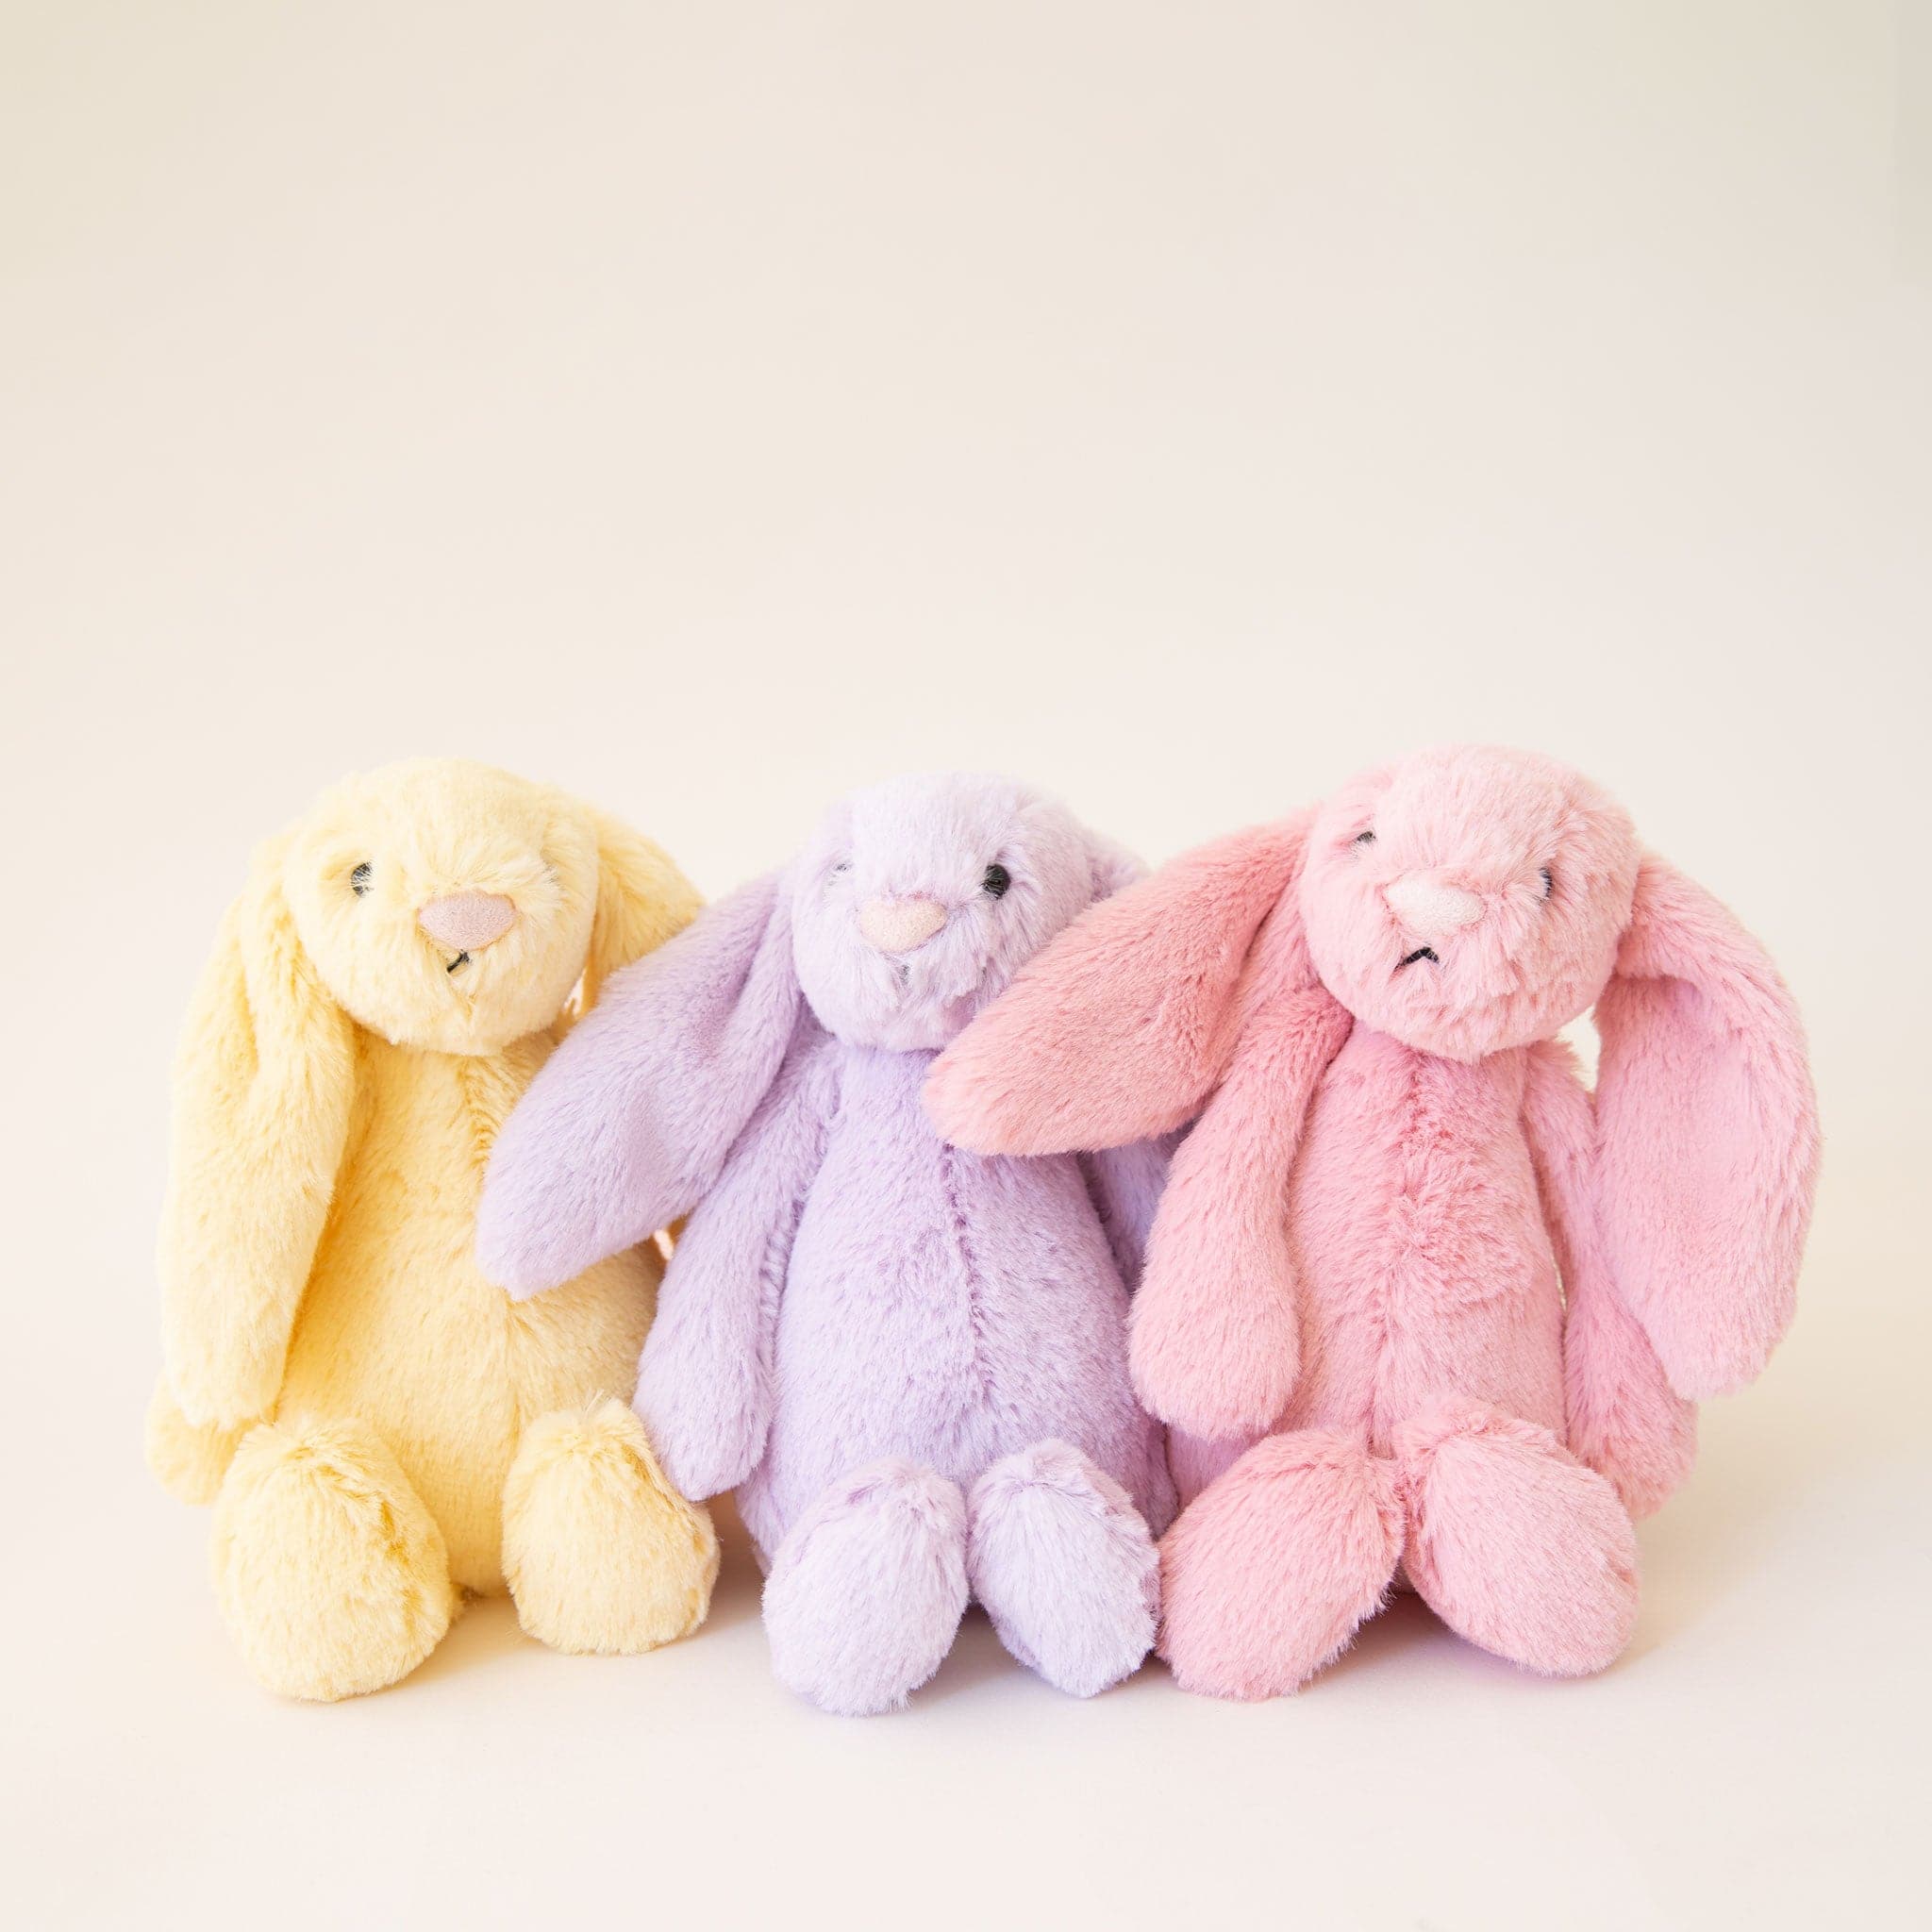 A fuzzy pink bunny stuffed animal with long floppy ears, a light pink nose and black eyes photographed here next to a yellow and lilac version of the bunny also available on our website.